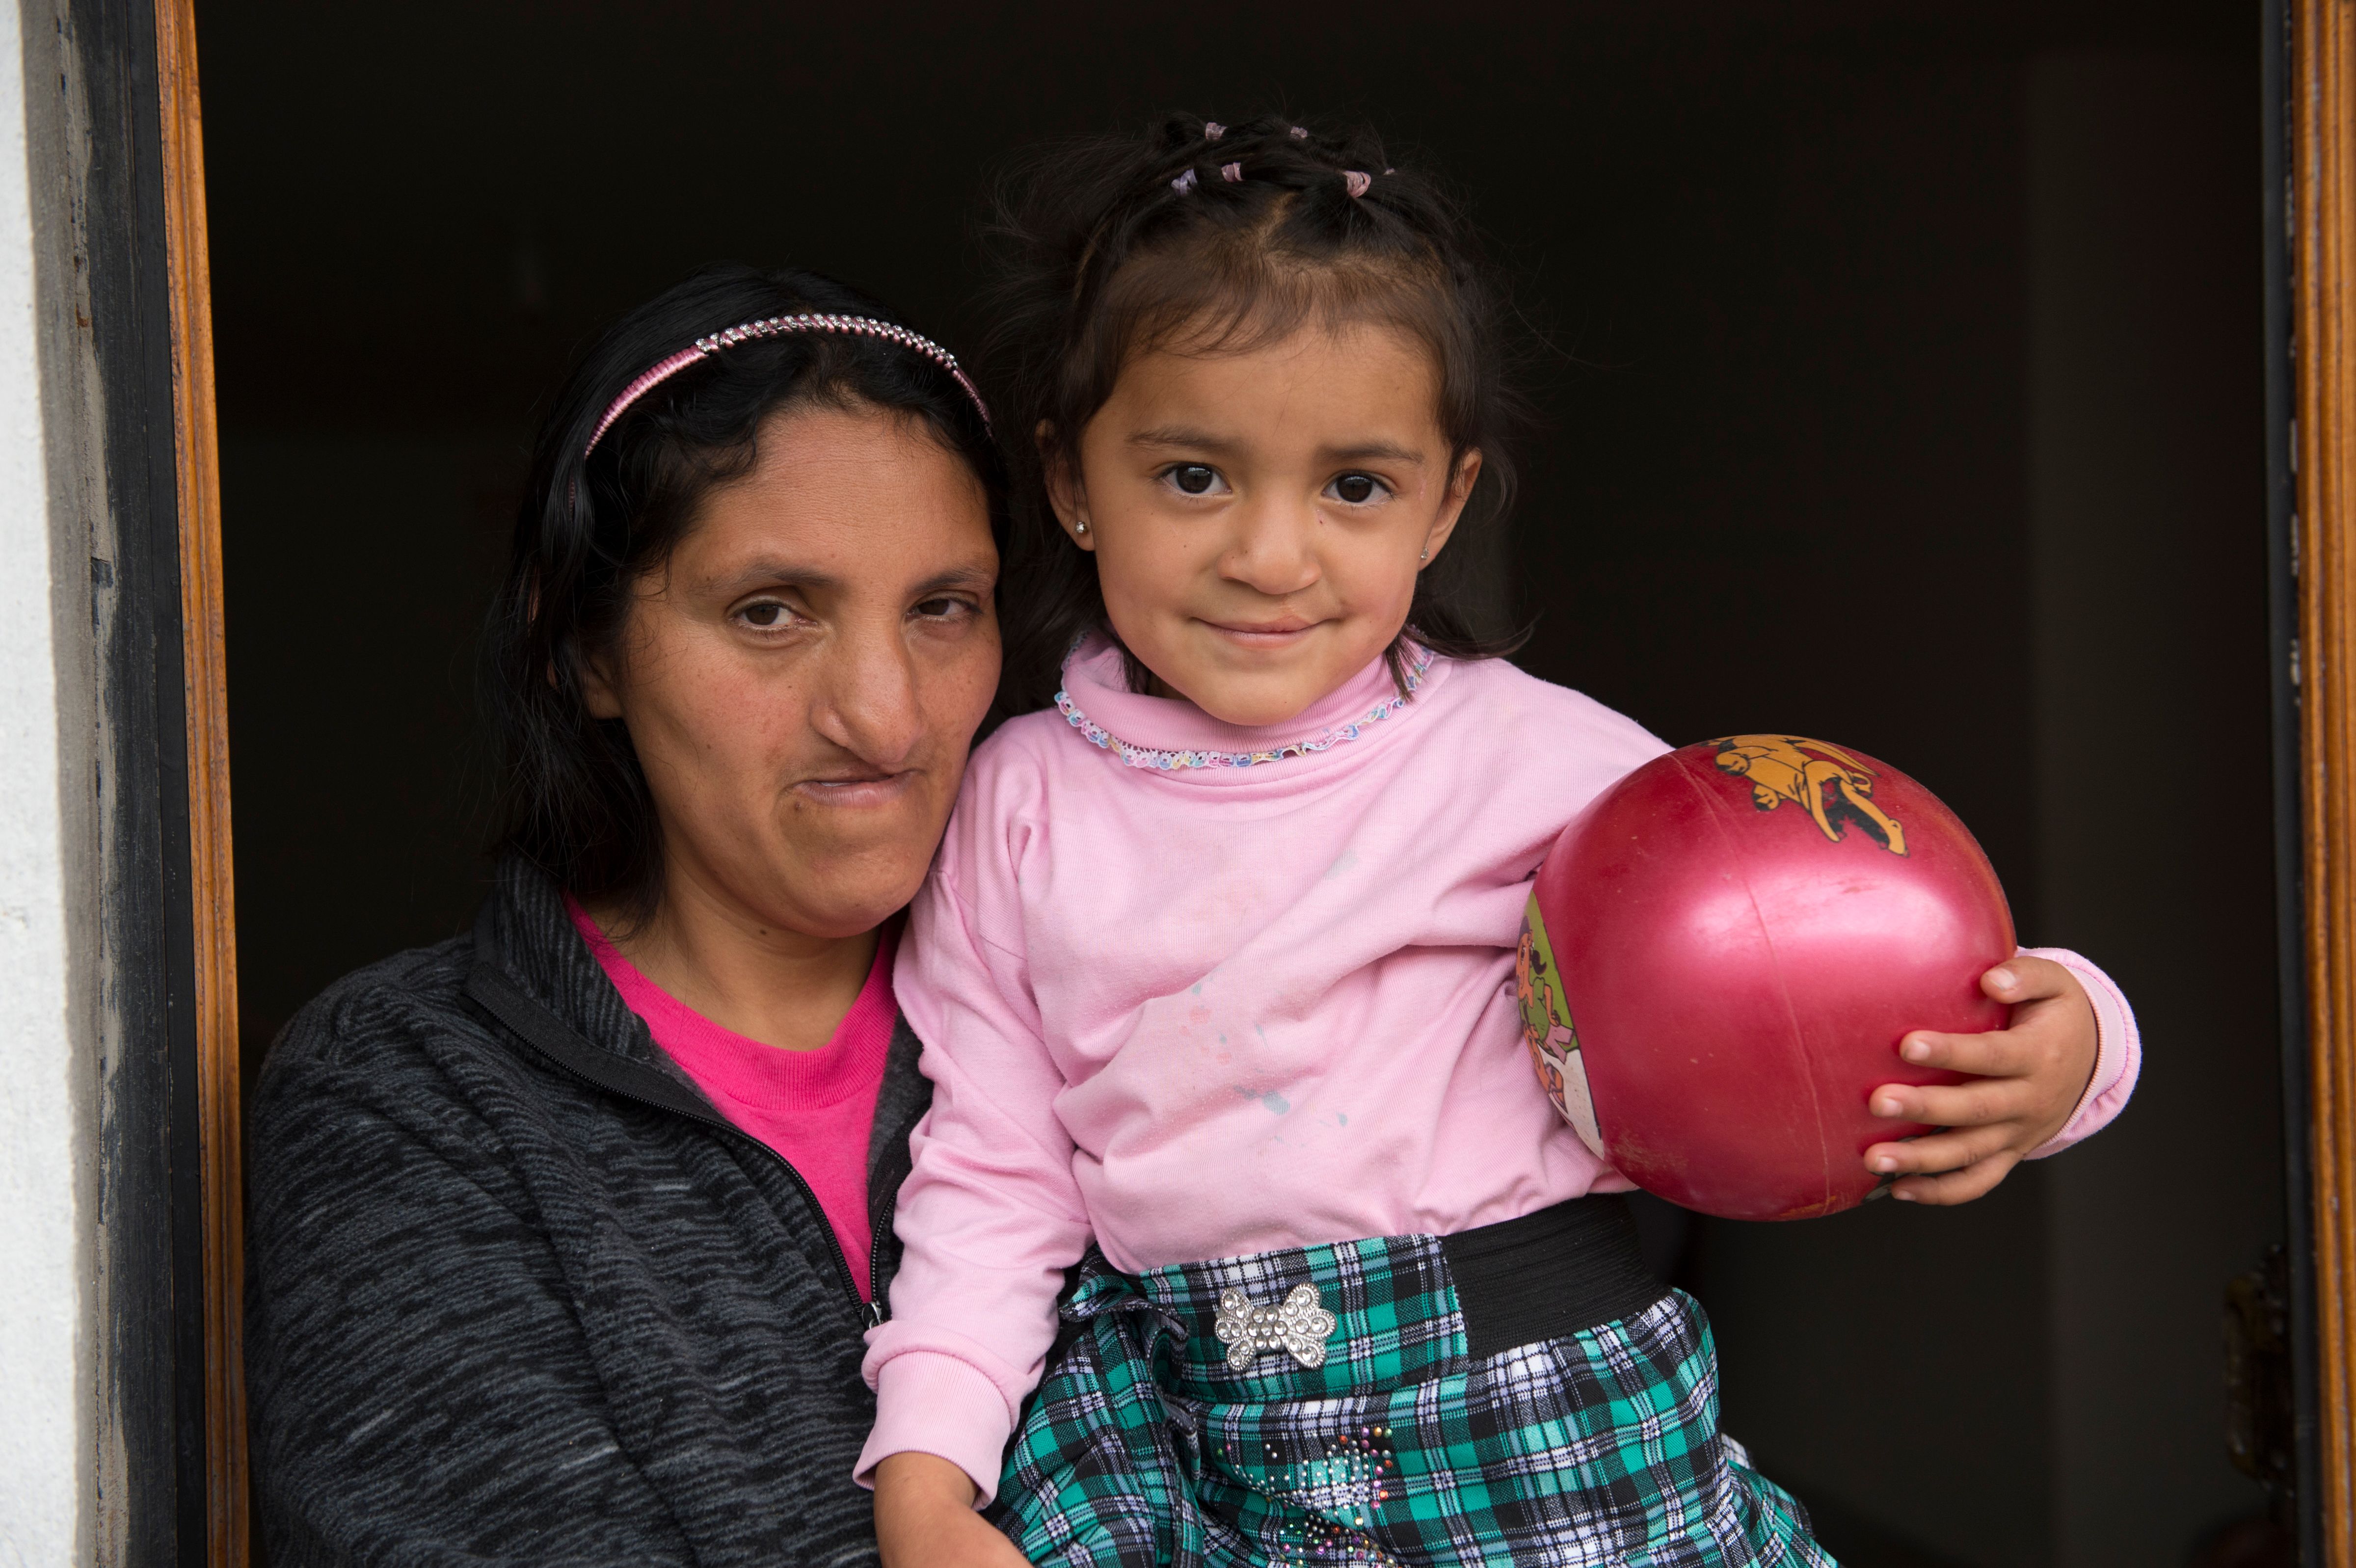 Estefania holding a ball and smiling with her mother Lourdes